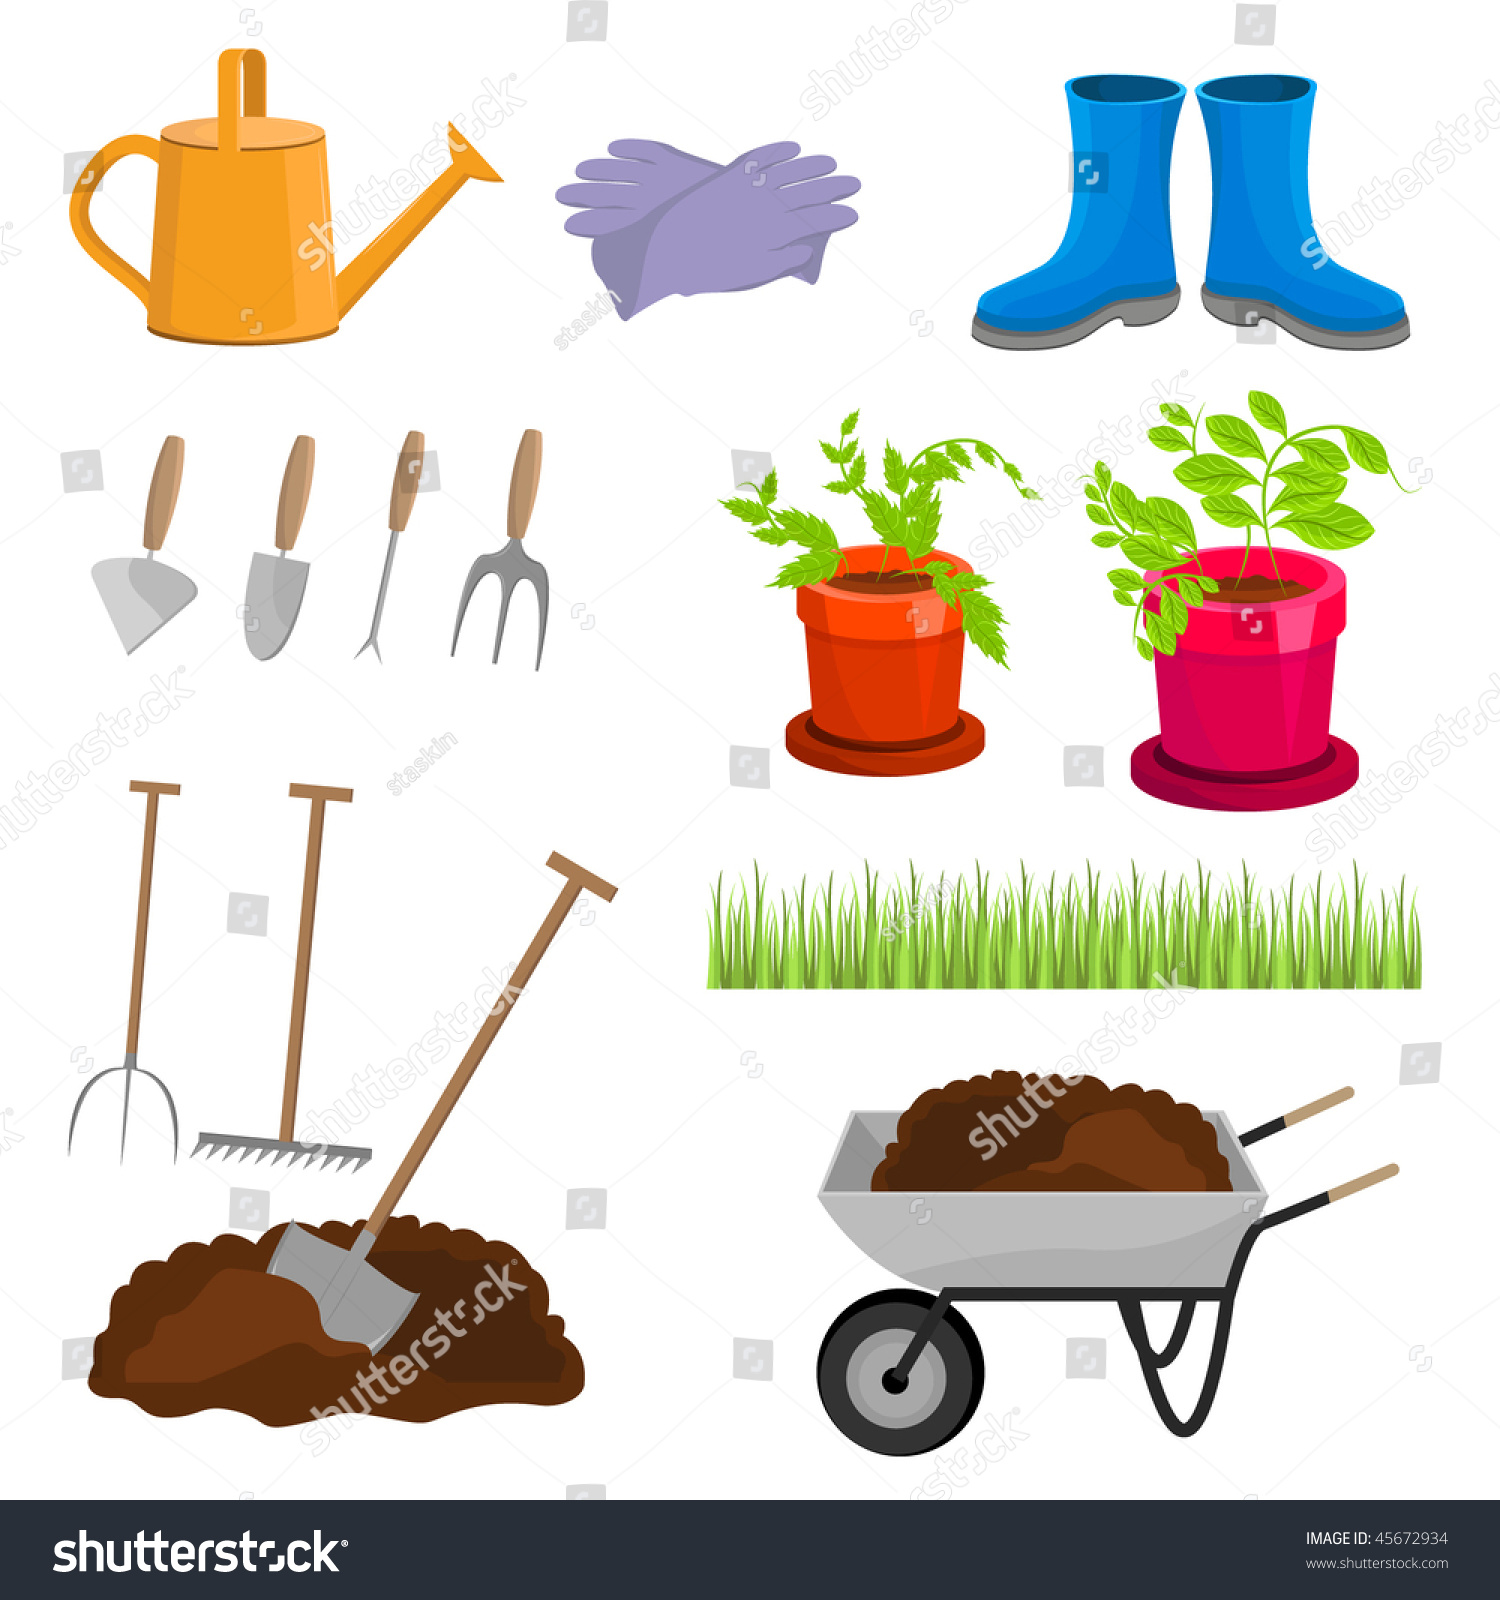 clipart pictures of gardening tools - photo #28